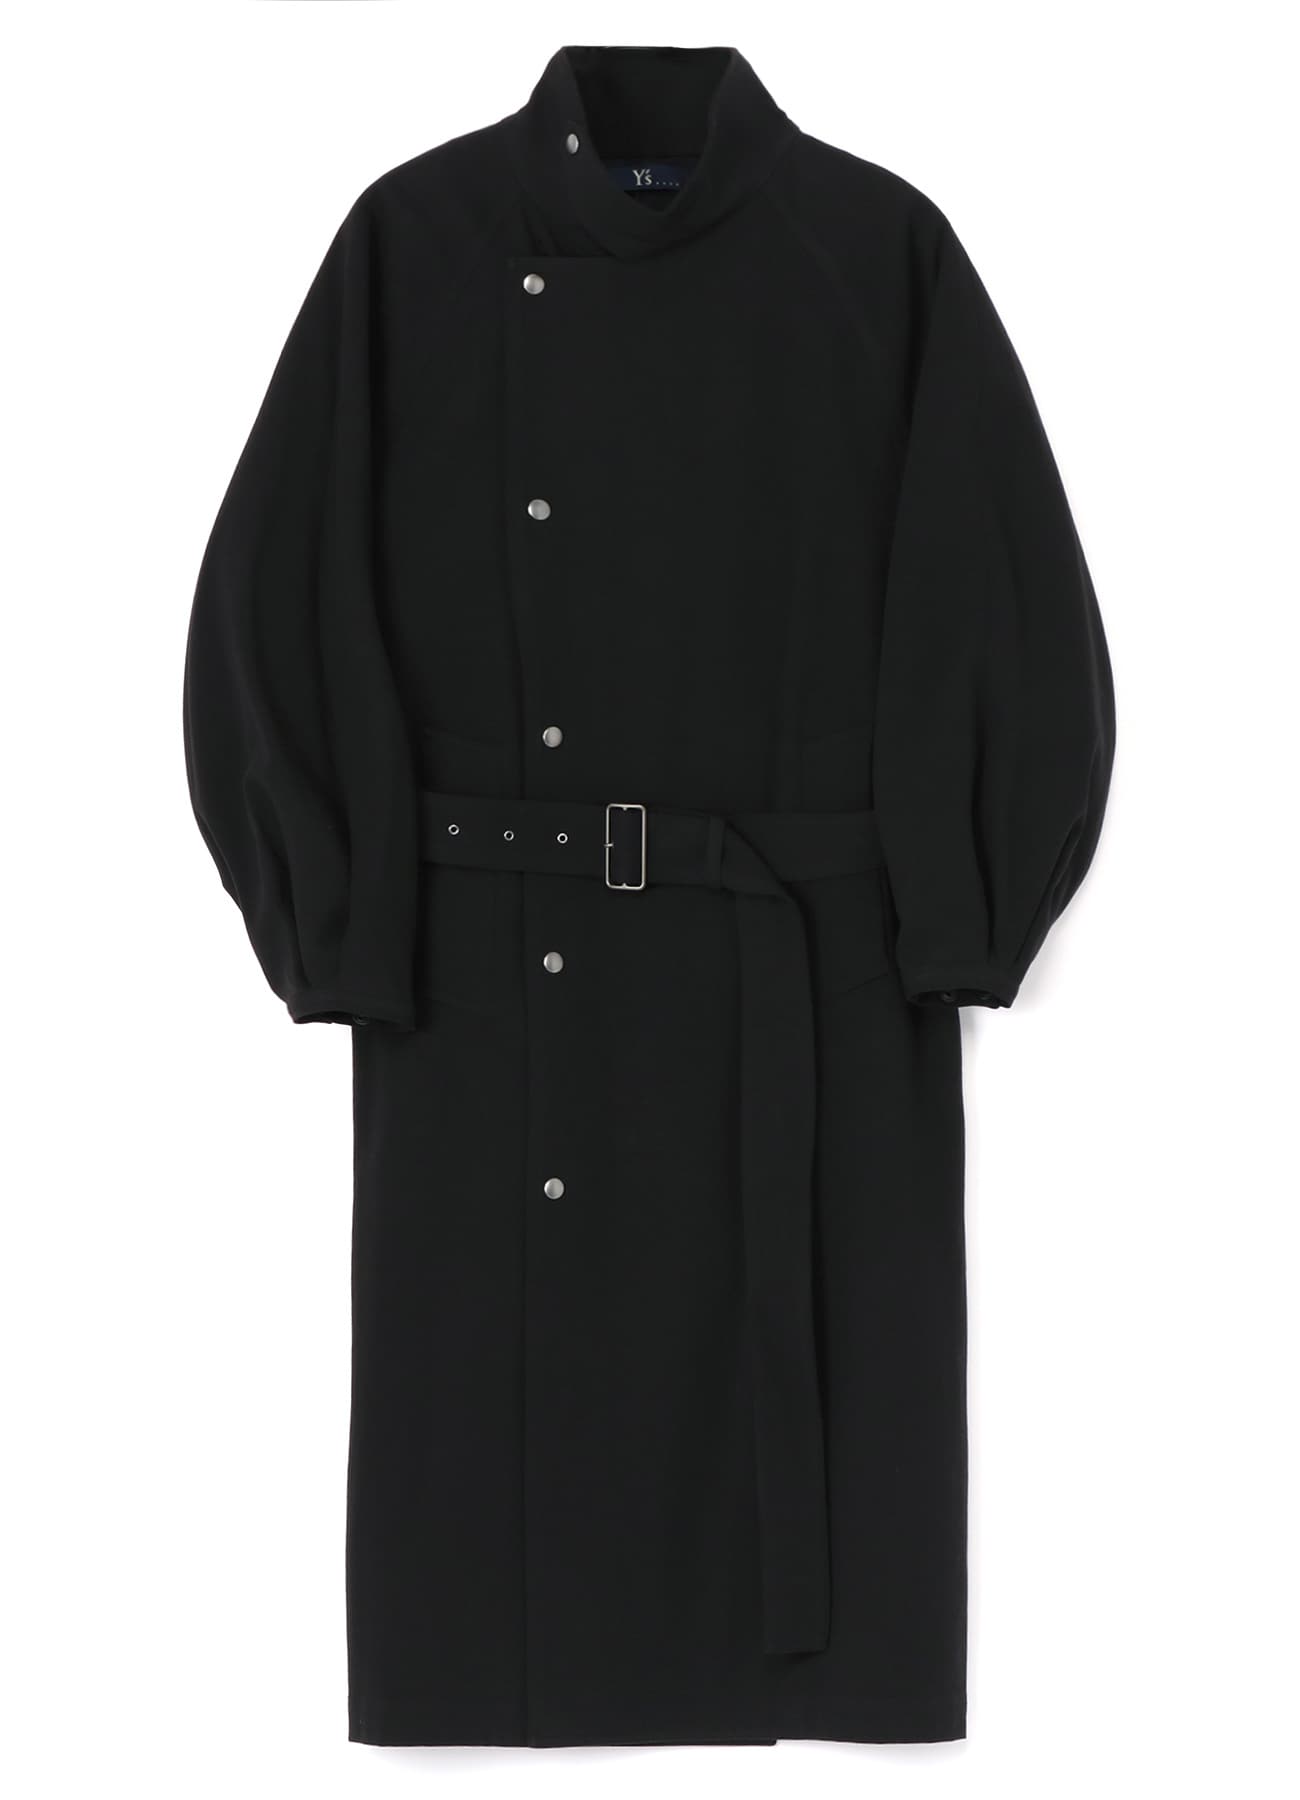 HARD TWISTED COTTON SATIN TRENCH COAT(XS Black): Y's.｜THE SHOP 